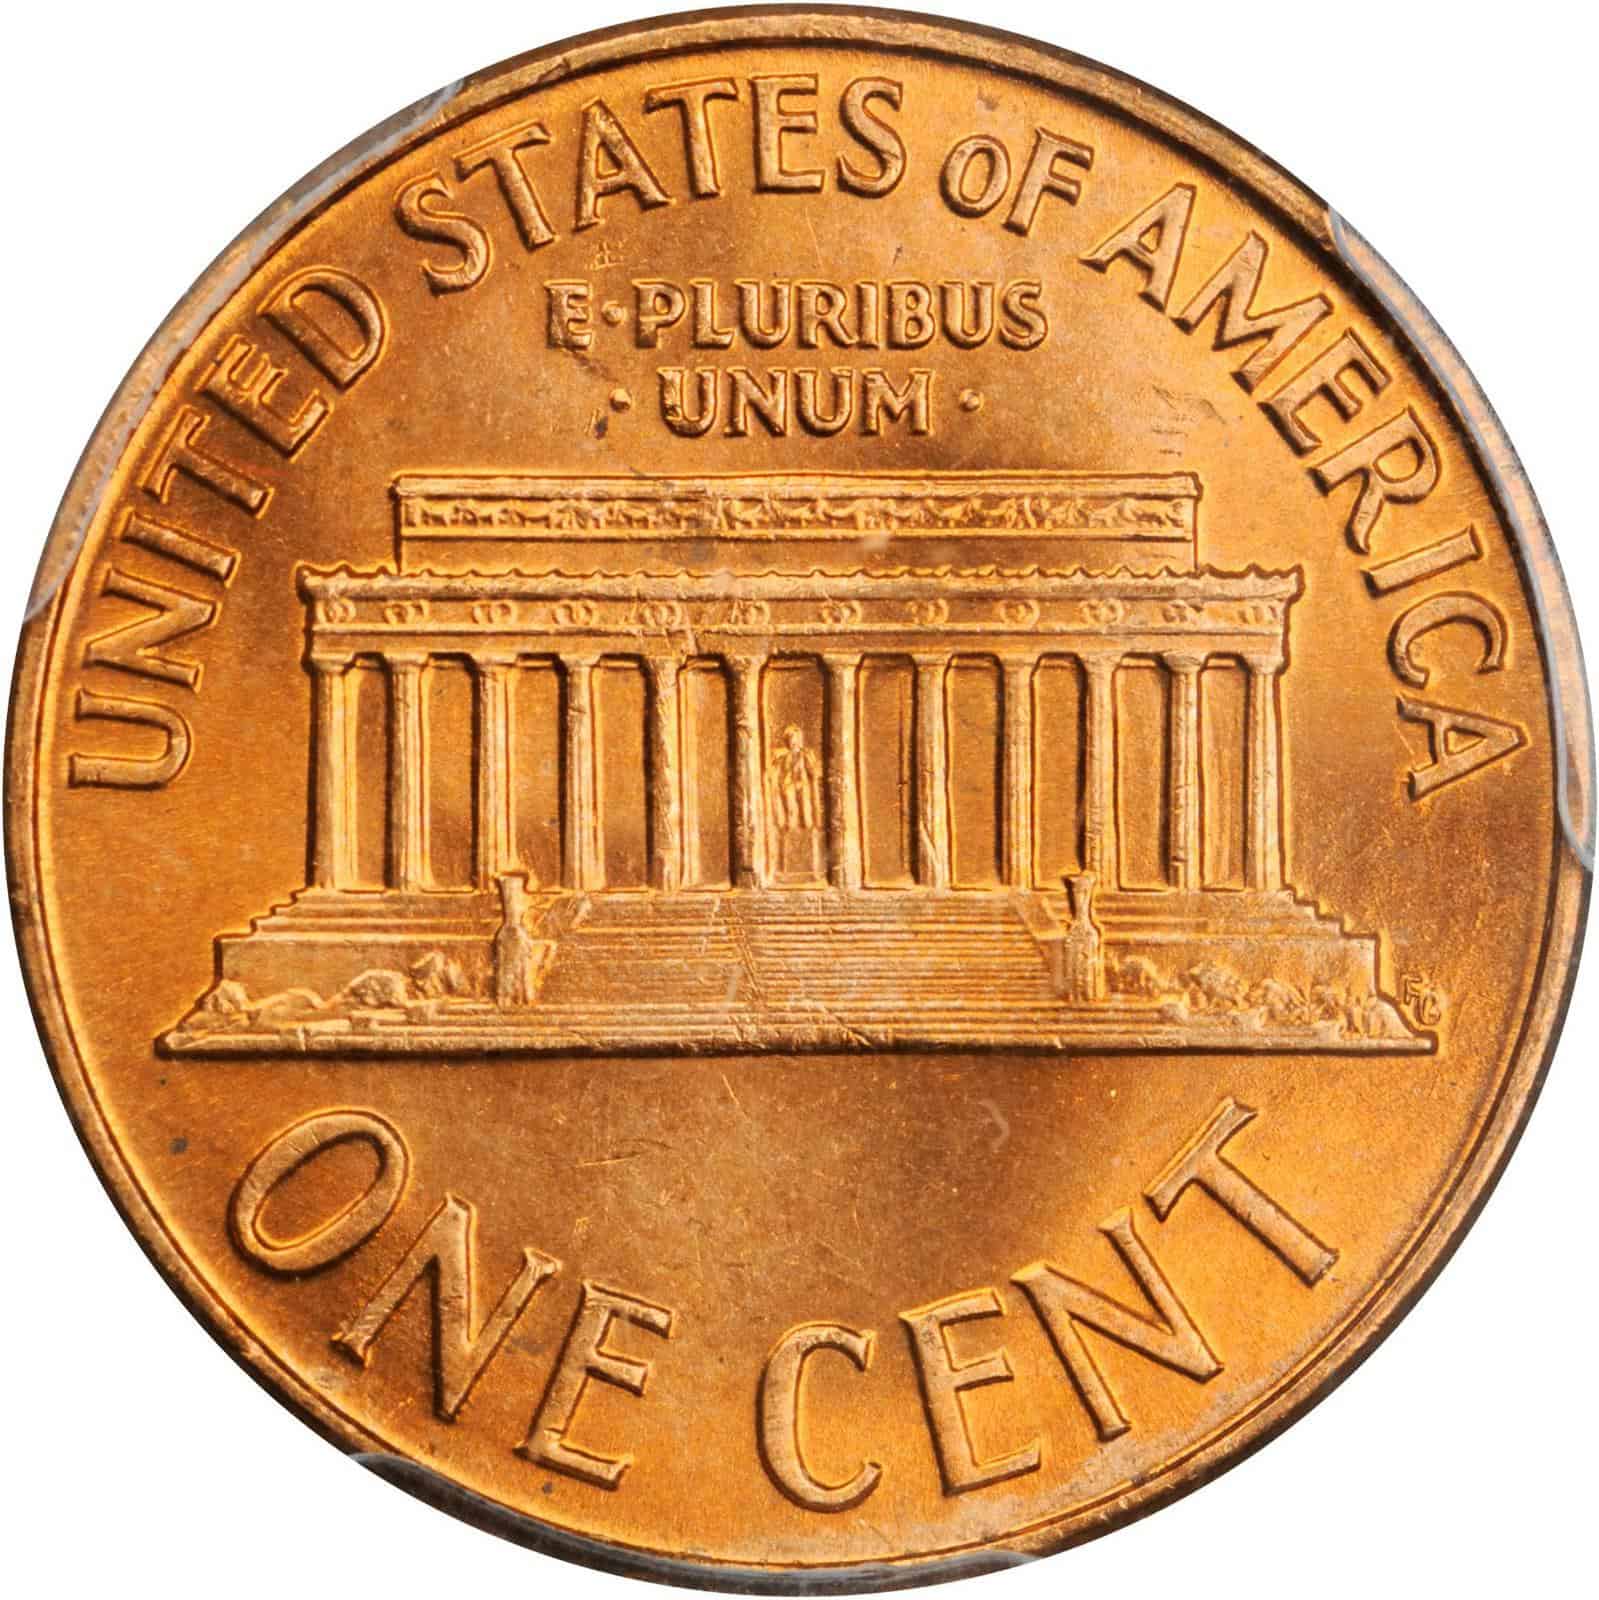 The reverse of the 1961 Lincoln Memorial penny